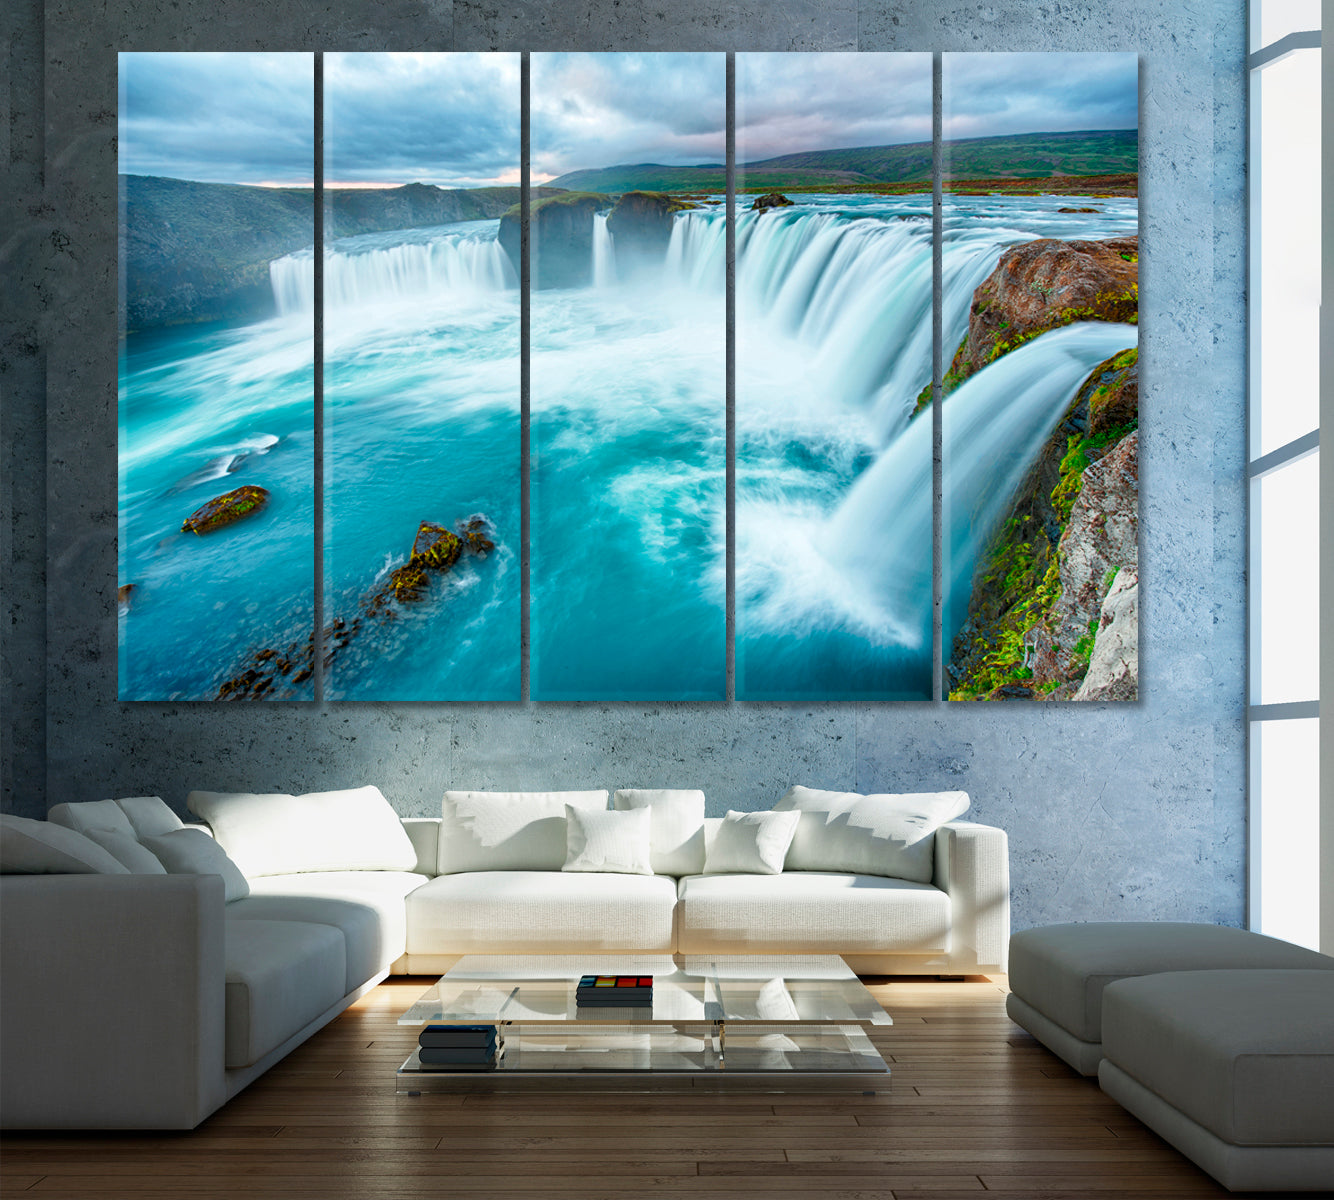 Godafoss Waterfall Iceland Canvas Print ArtLexy 5 Panels 36"x24" inches 